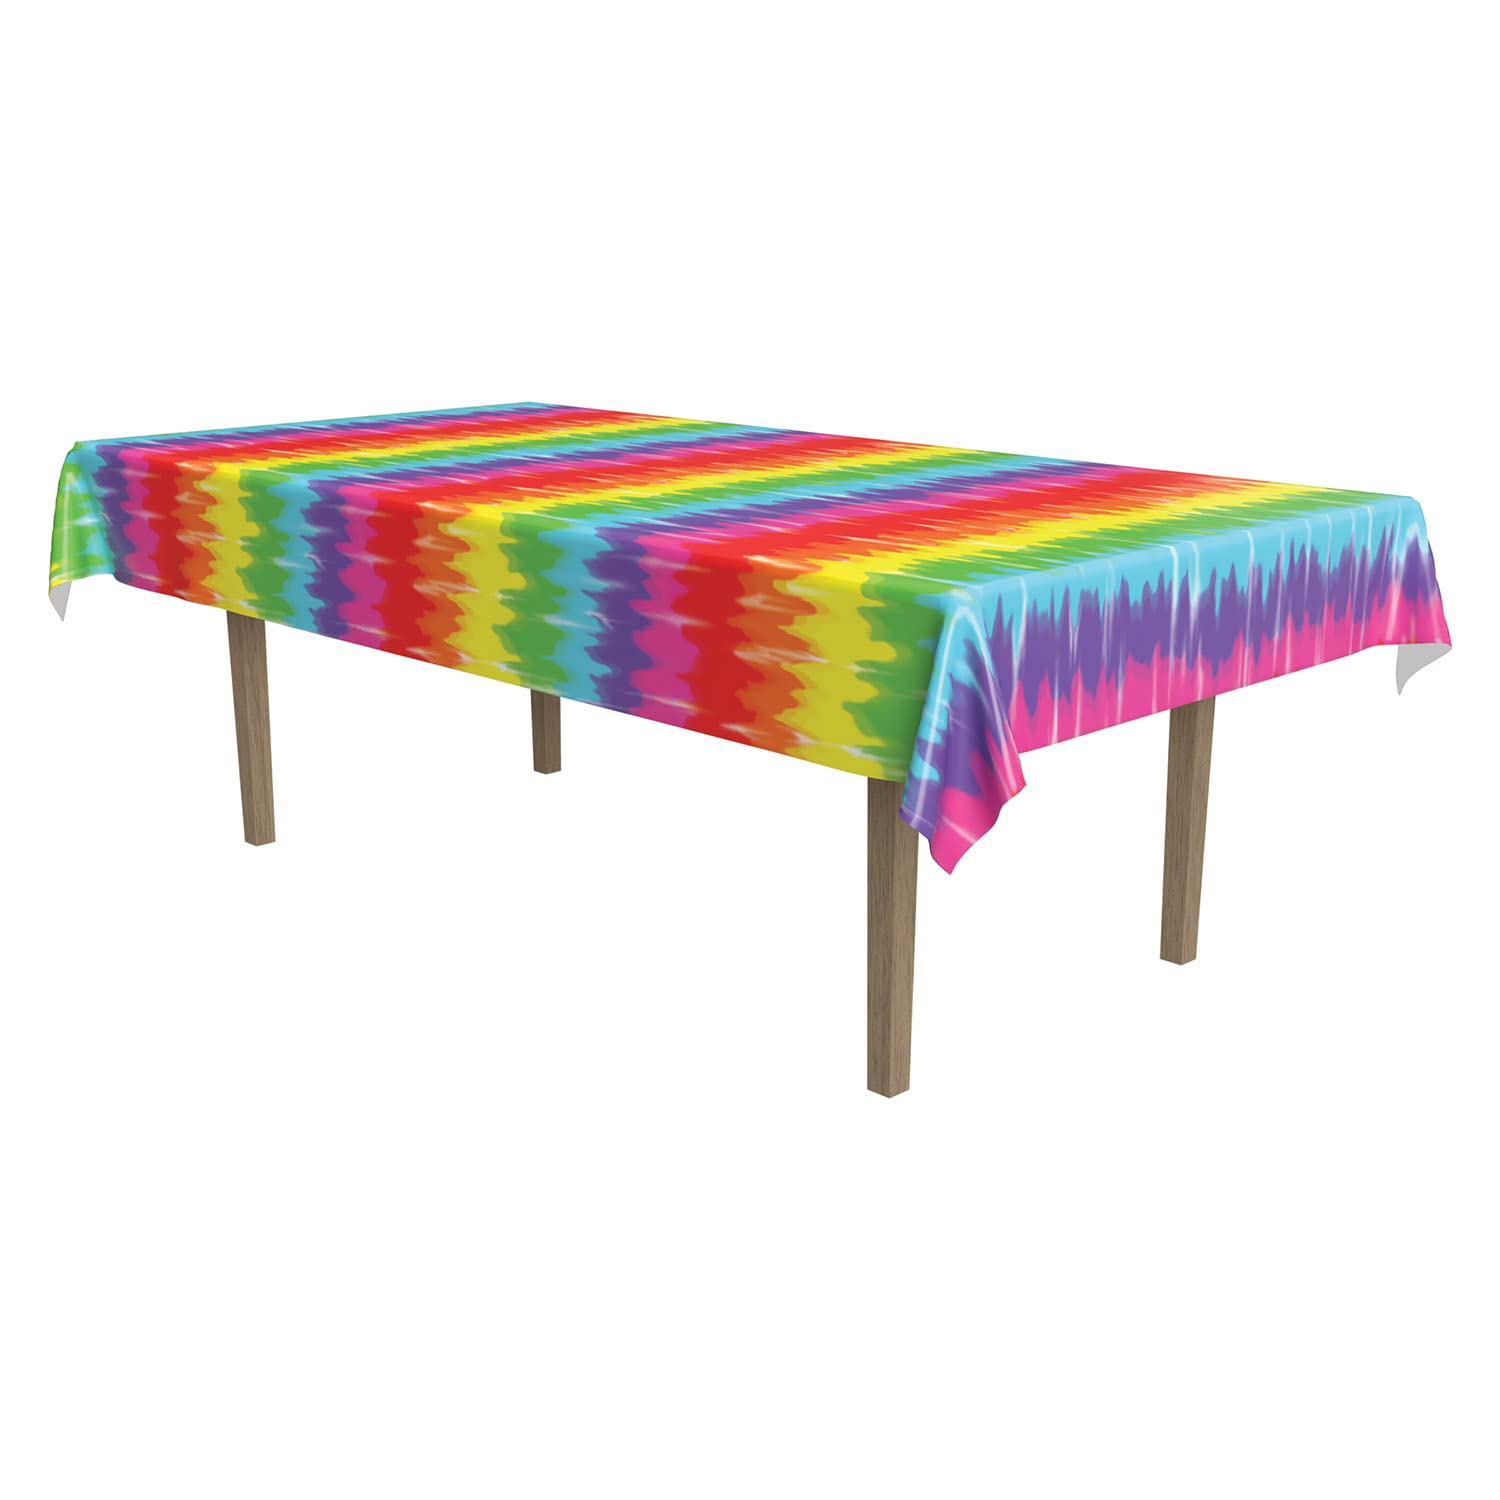 Beistle Tie-Dyed Tablecover, 54” x 108” – Plastic Table Cloth, Rectangular Tablecloth, Table Covers for Party, Tie Dye Table Cloth, Rainbow Table Cloths for Parties, Tie Dye Party Supplies